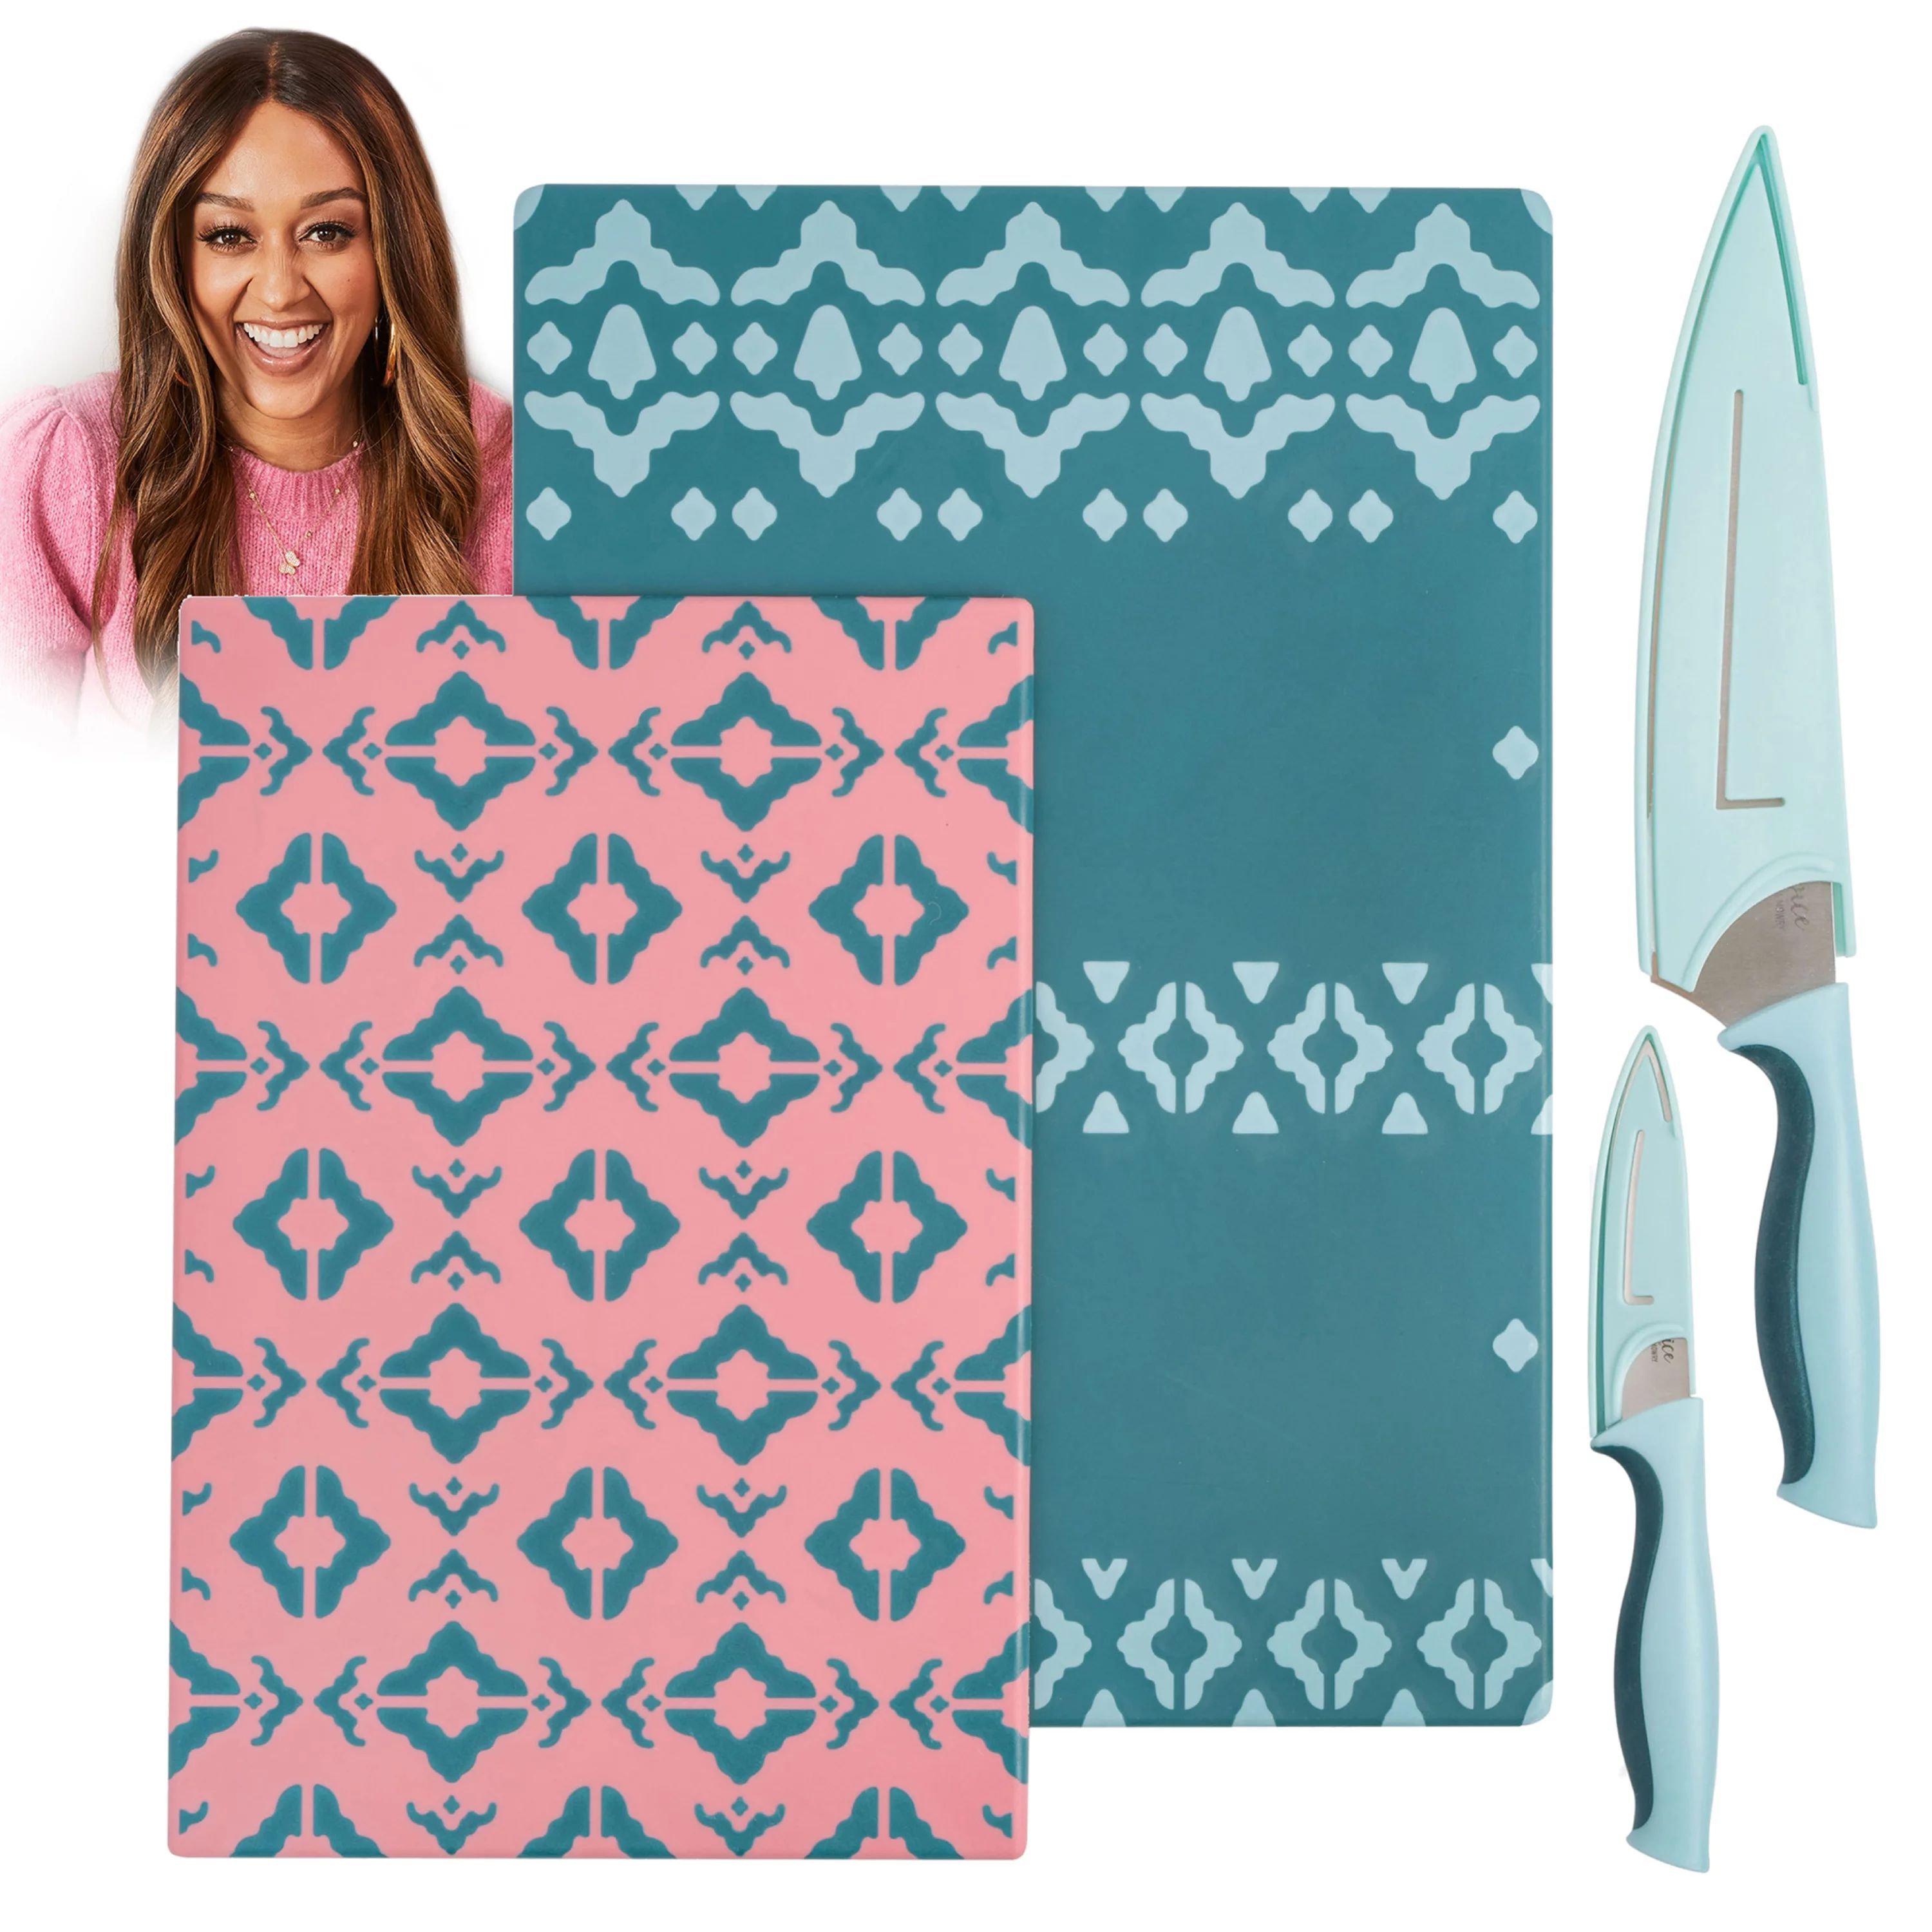 Spice by Tia Mowry Savory Saffron Teal 6-PIece Cutlery and Cutting Board Set | Walmart (US)